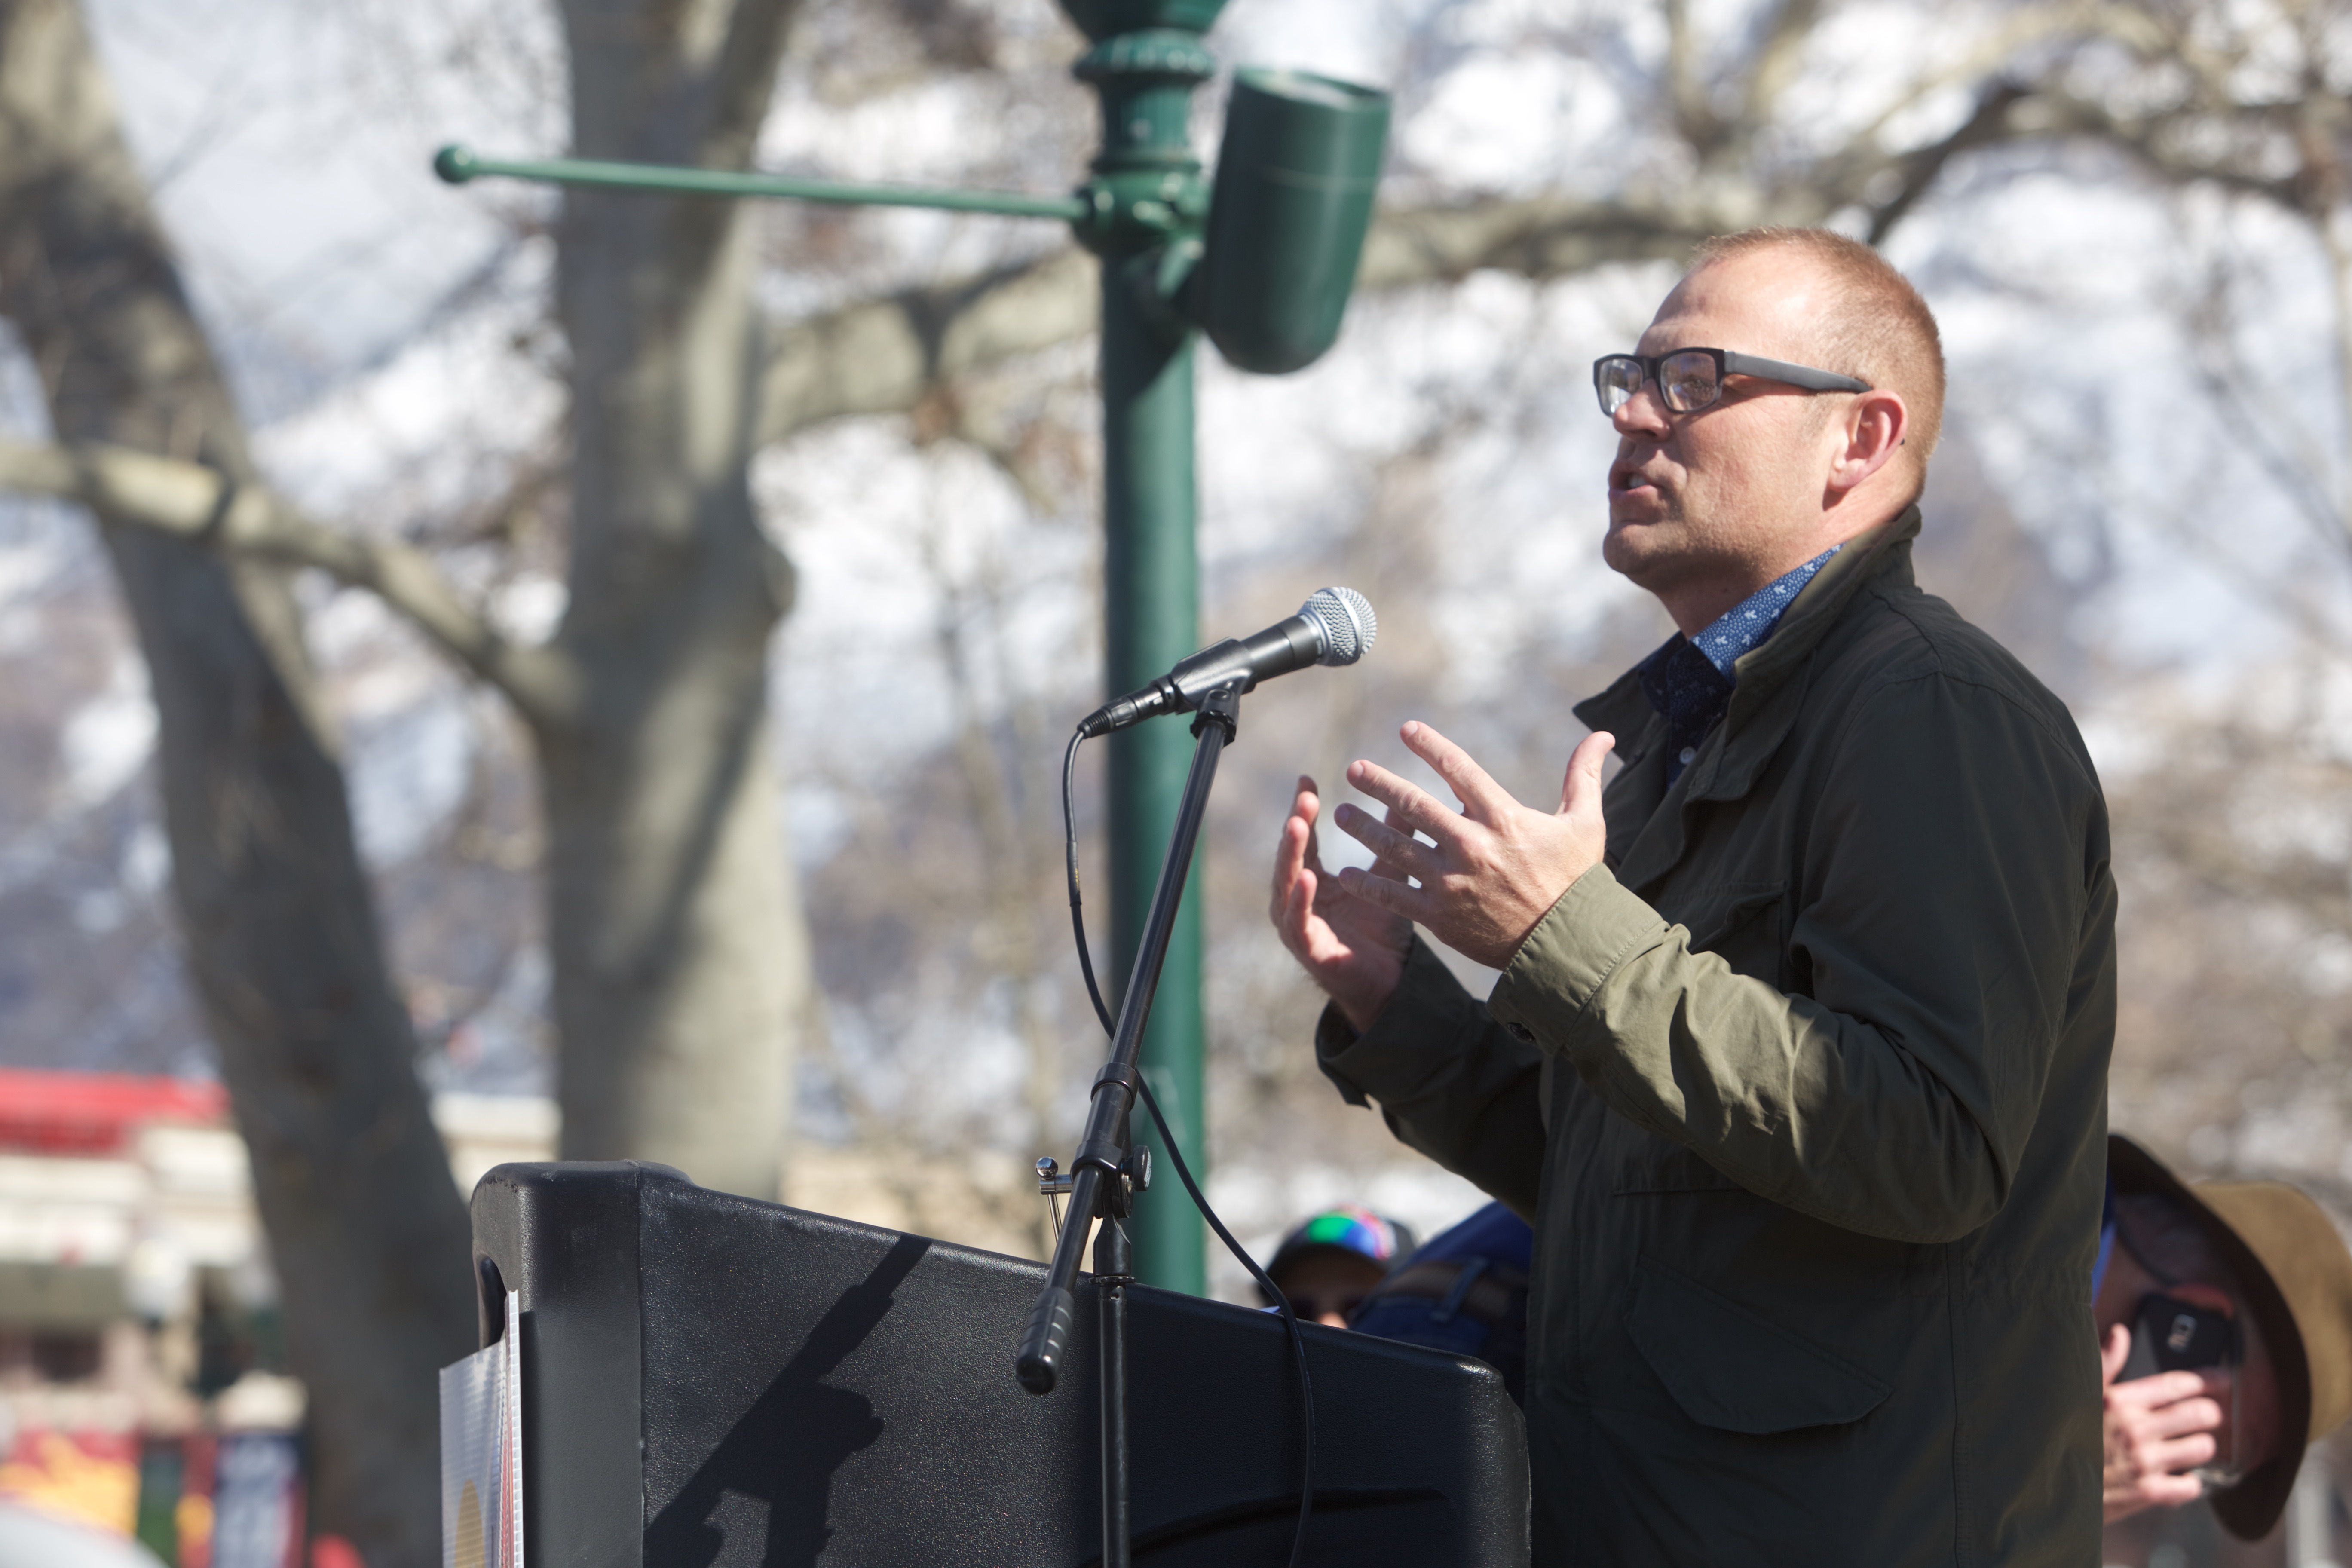 BYU biology professr Zach Aanderud speaks at the first Utah Valley Clean Air Rally. He said there is no such thing as clean fossil fuels fuels. (Gianluca Cuestas)